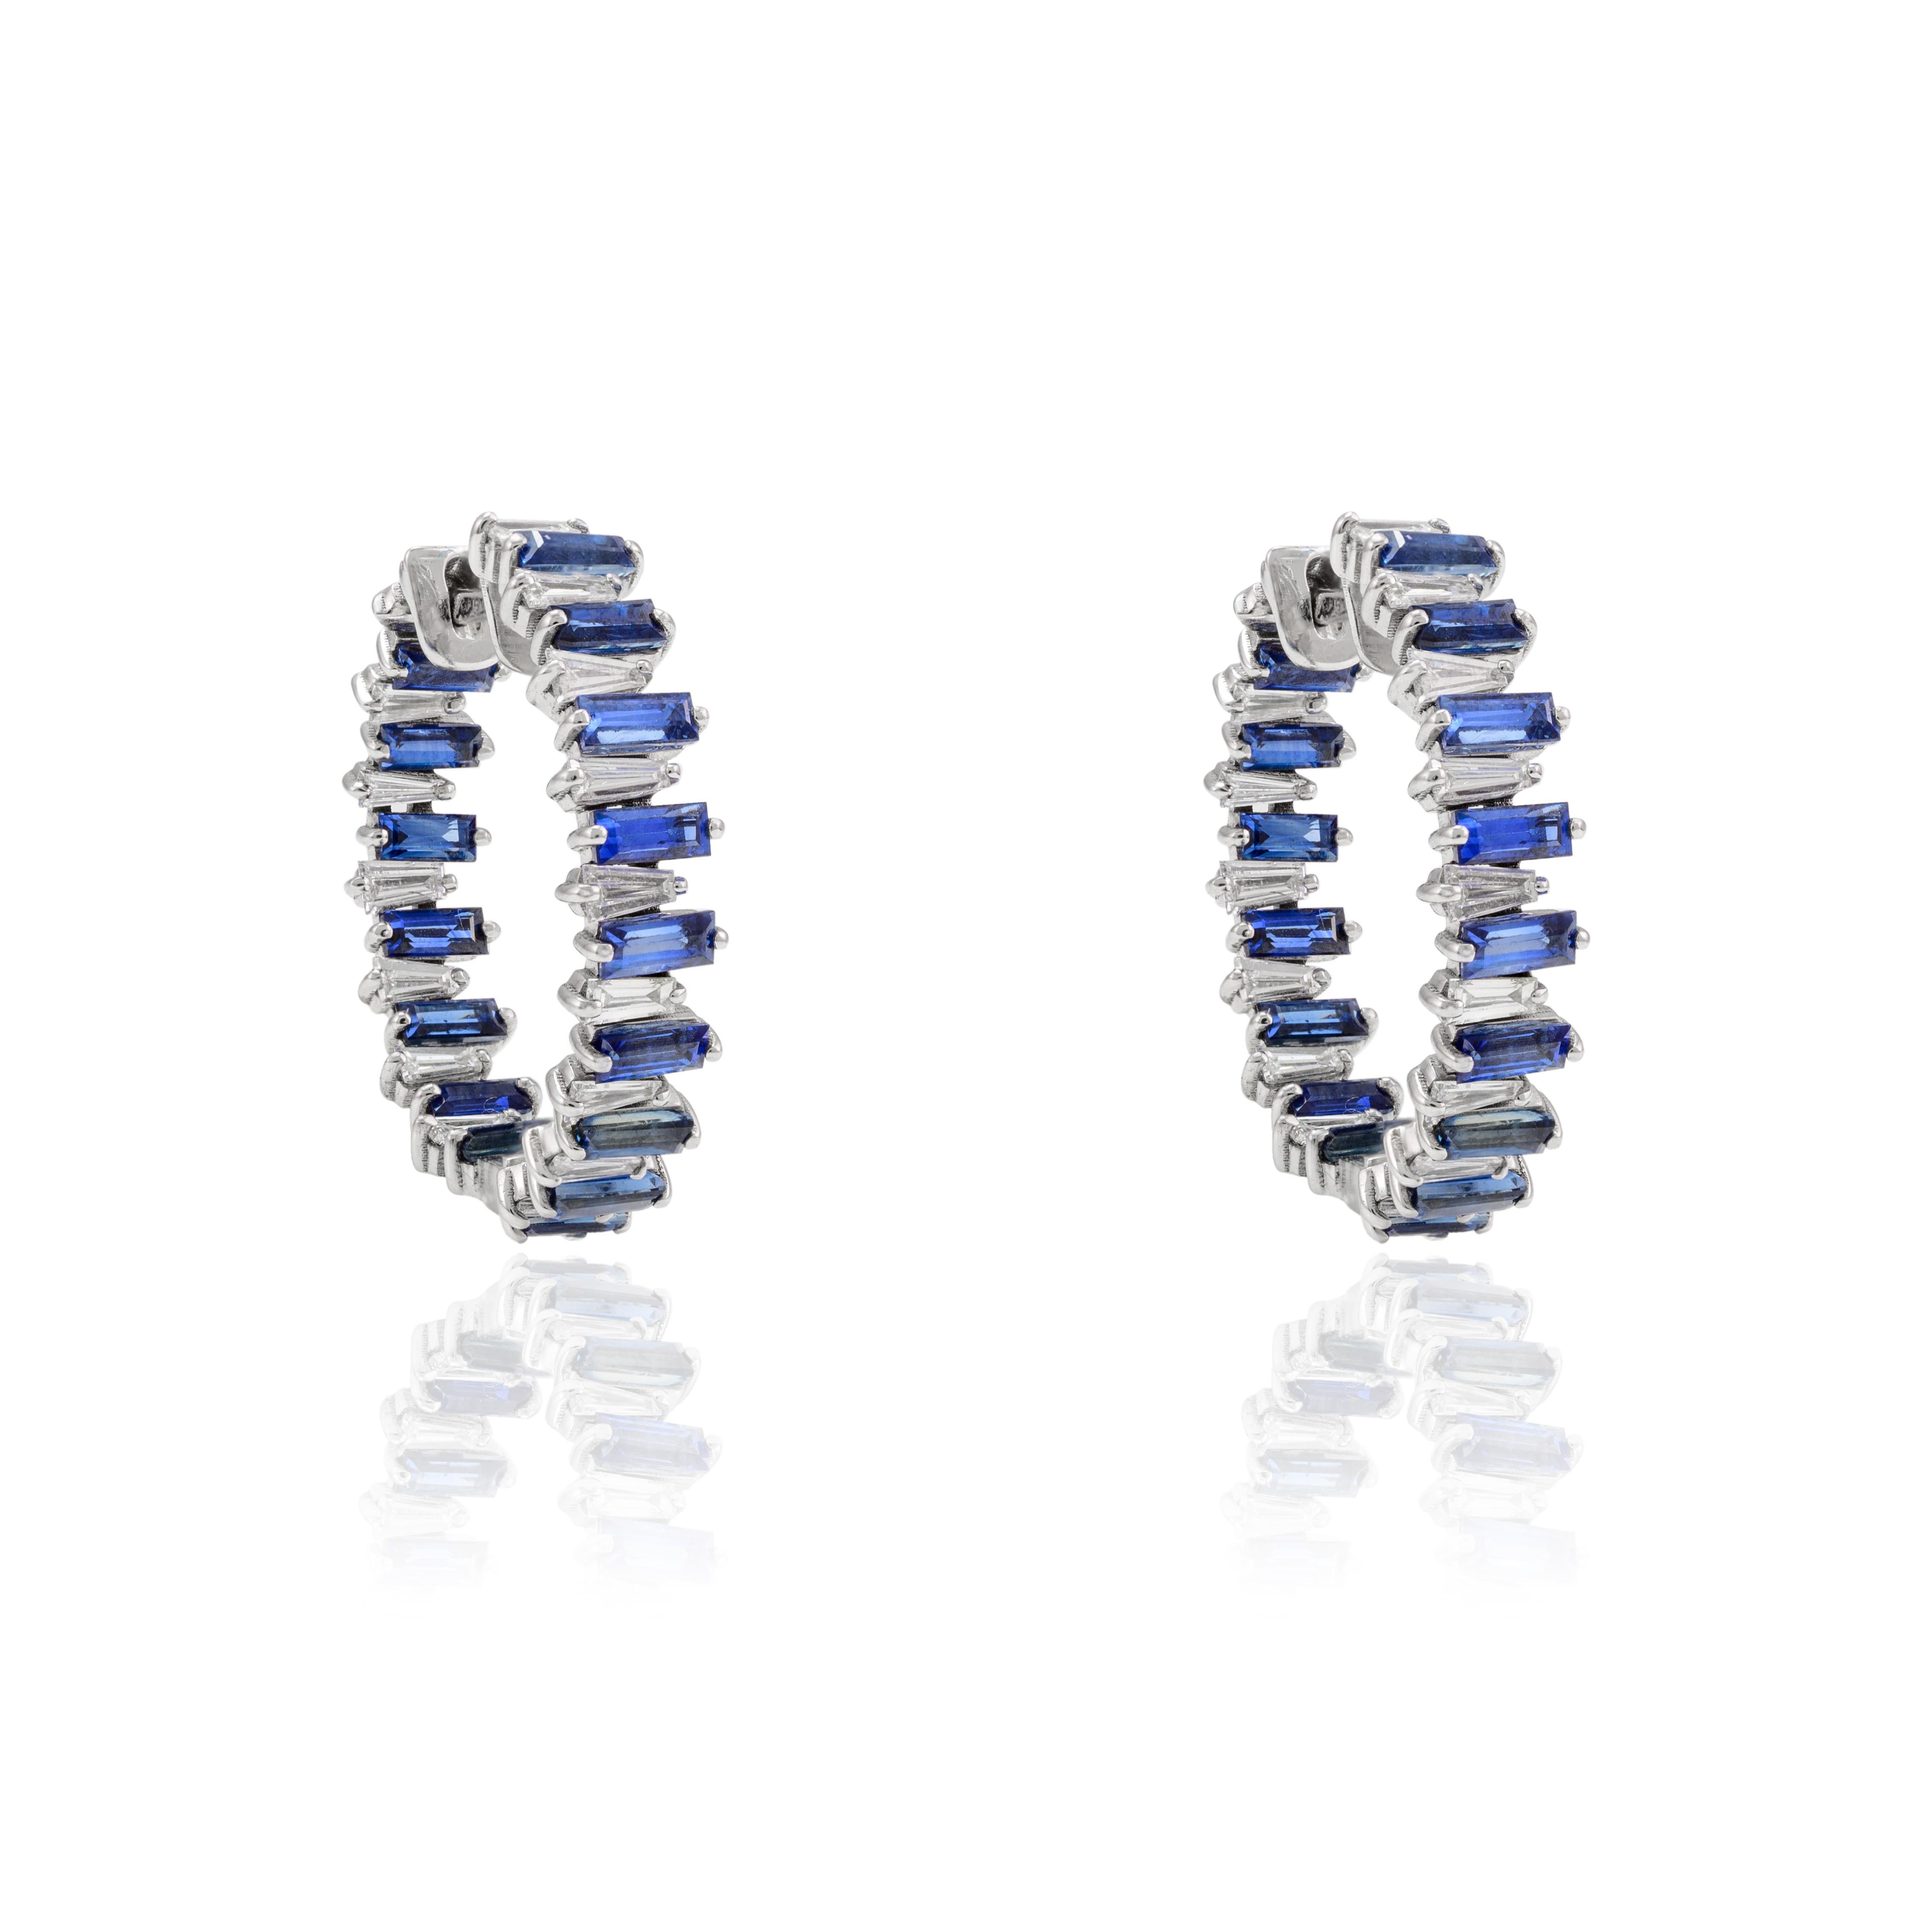 Blue Sapphire and Diamond Hoop Earrings in 14K Gold to make a statement with your look. You shall need stud earrings to make a statement with your look. These earrings create a sparkling, luxurious look featuring baguette cut sapphires and